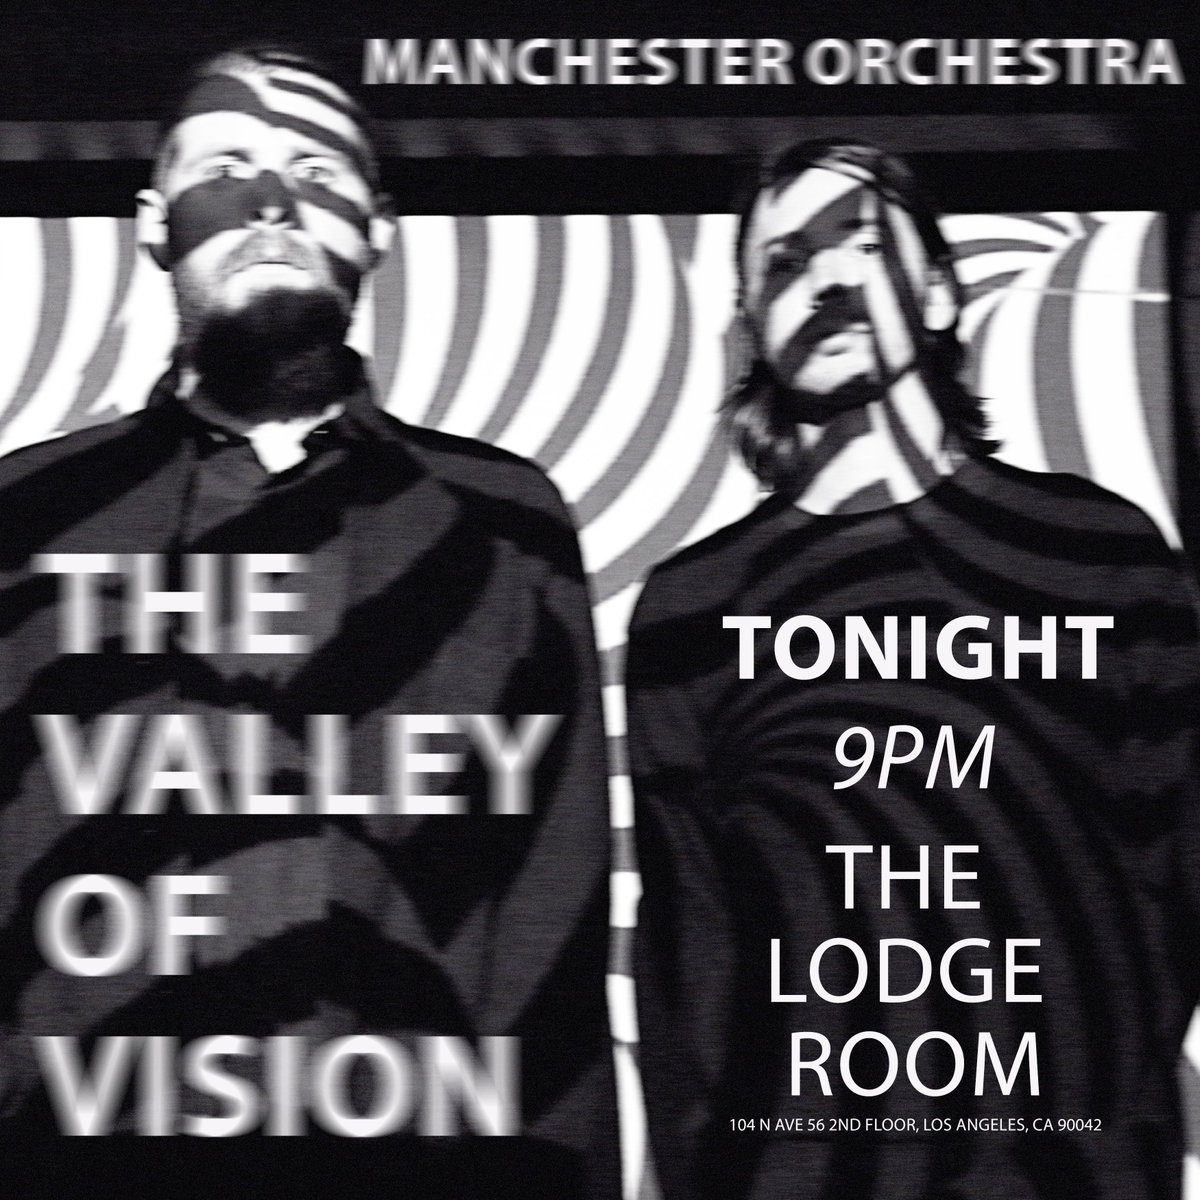 LOS ANGELES. TONIGHT. We are premiering our new film THE VALLEY OF VISION & performing an intimate acoustic set TONIGHT at the @lodgeroom. Limited tickets available. See you tonight! TICKETS: lodgeroomhlp.com **tickets from z ranch event will be honored